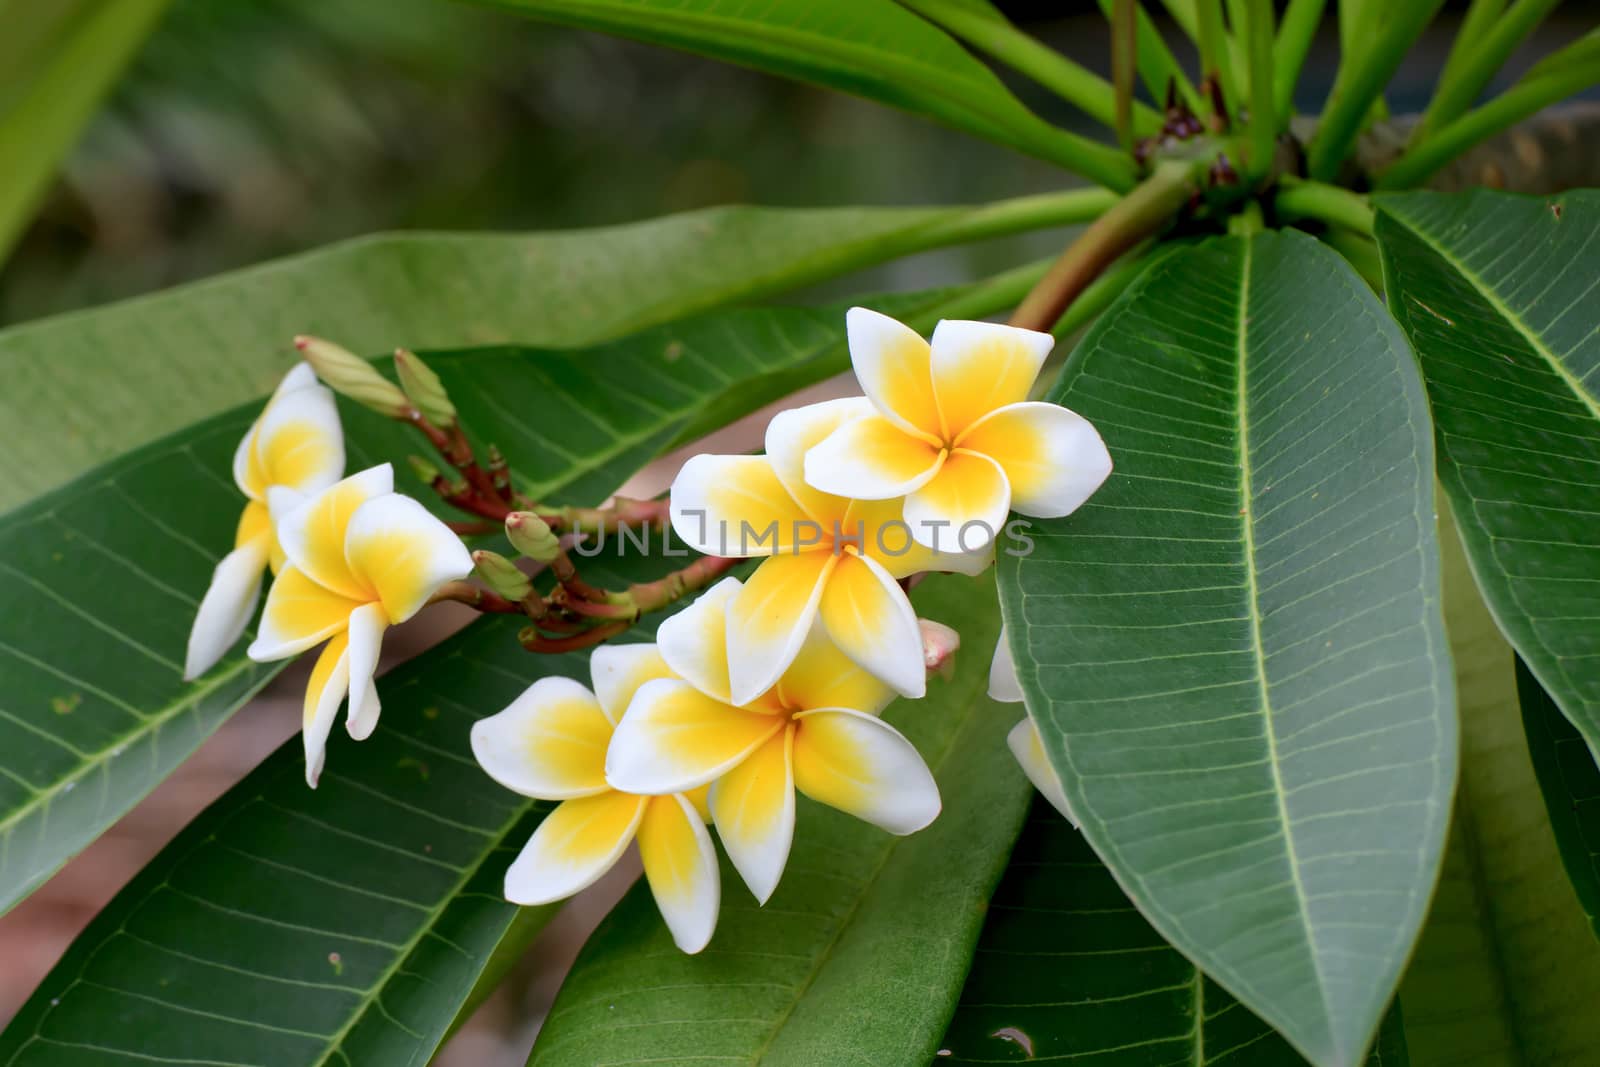 White and yellow frangipani flowers with leaves in background.